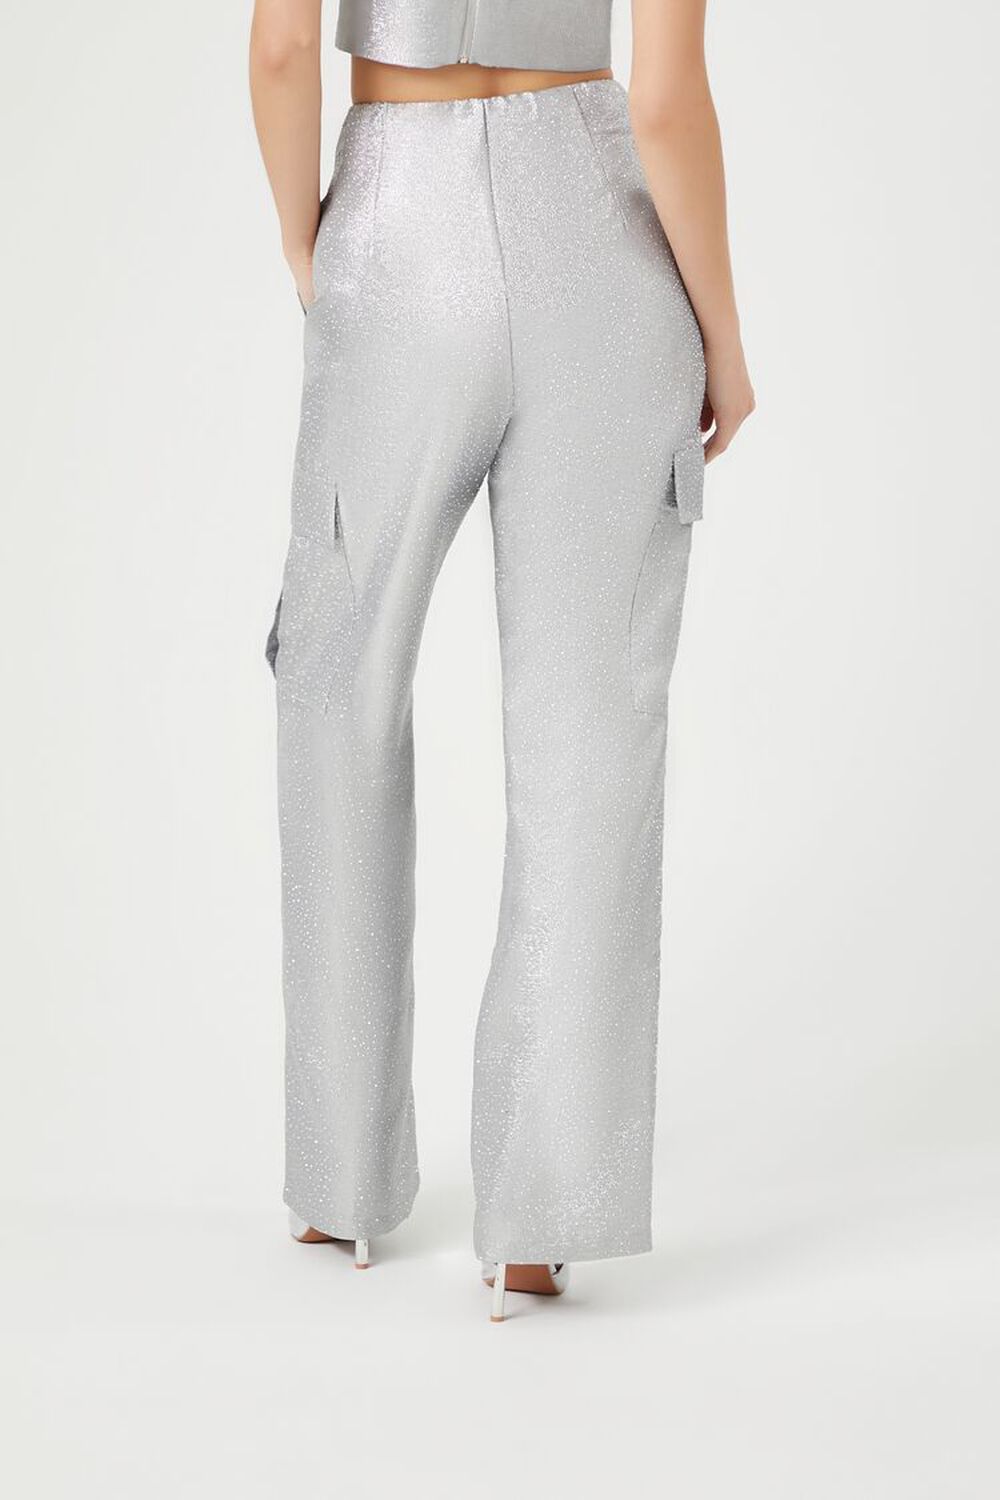 Forever 21 Satin Cargo Pants - ShopStyle